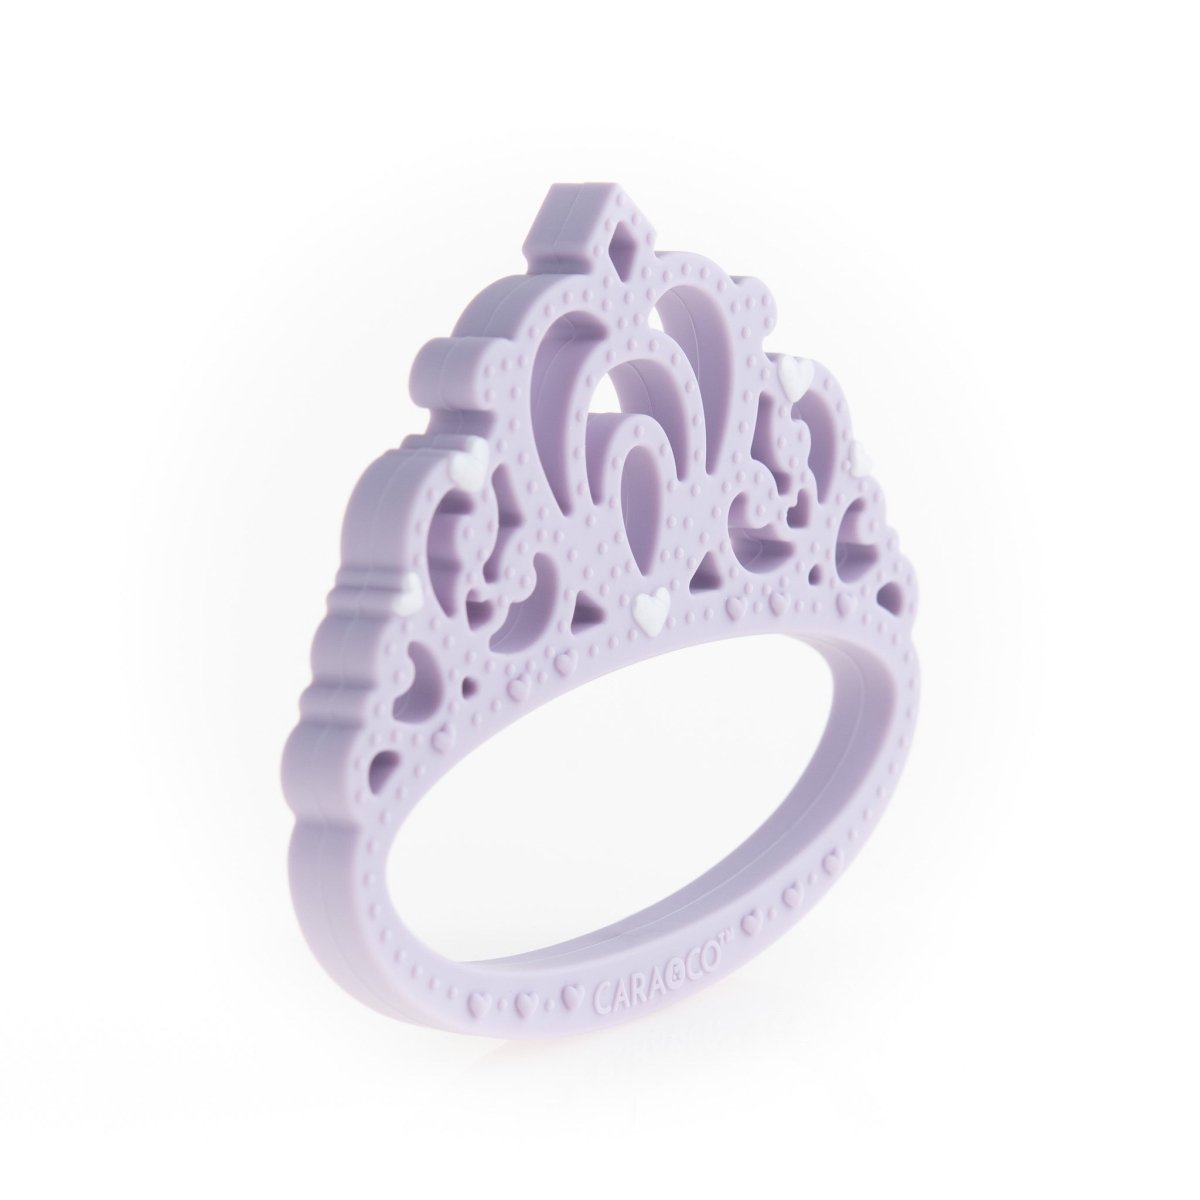 Silicone Teethers and Pendants Tiaras Lilac from Cara & Co Craft Supply